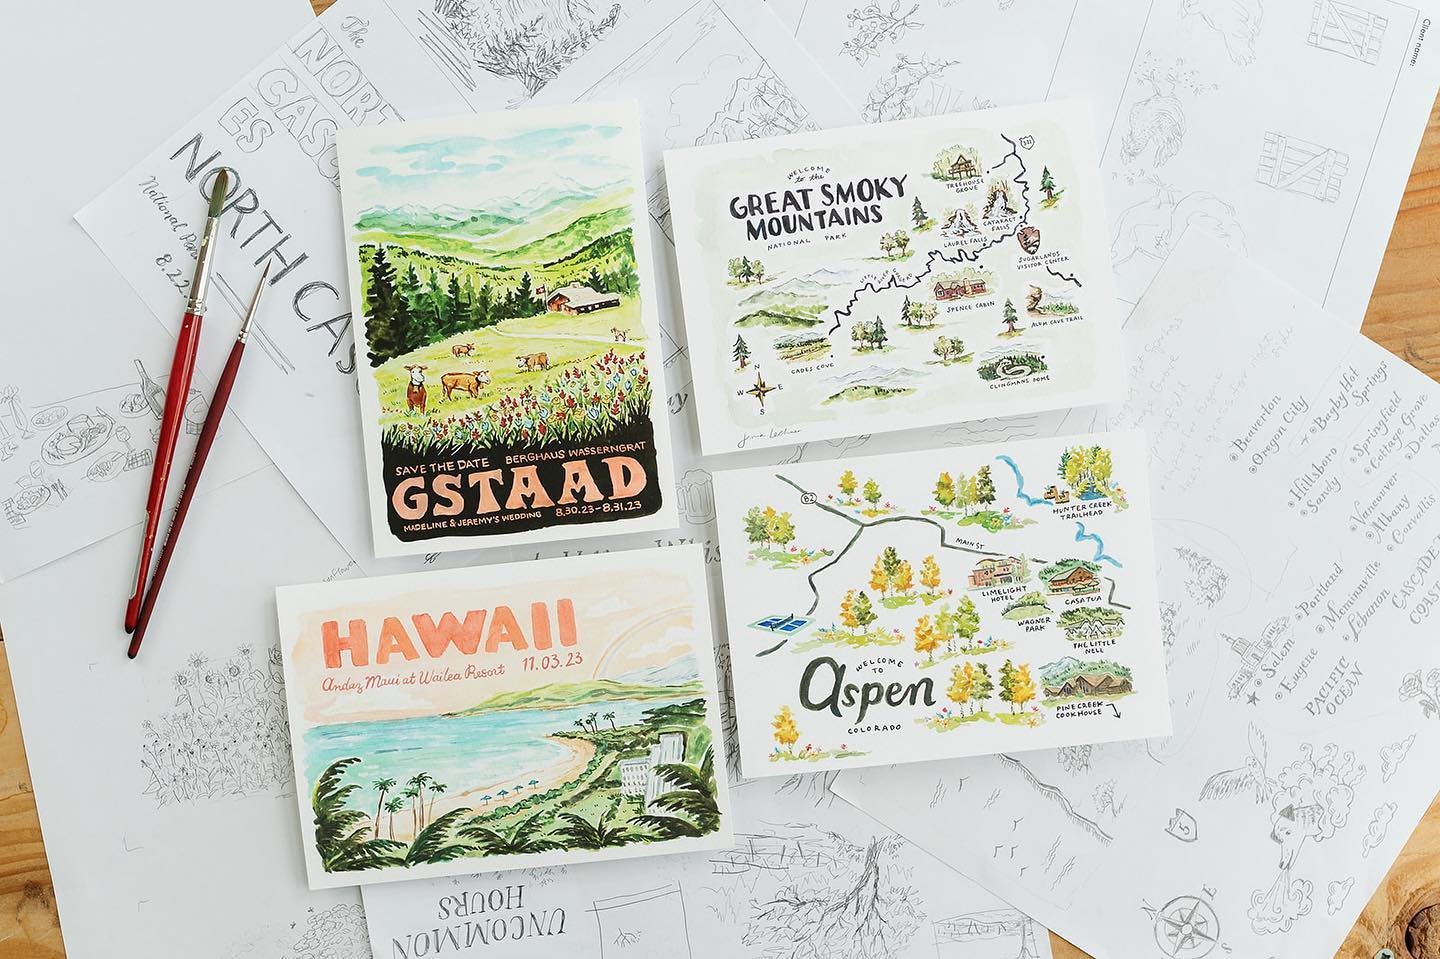 Some illustrations I created for custom stationery, from a little while back. Featuring various locations&hellip;Gstaad, Switzerland; Aspen, Colorado; Maui and @greatsmokynps in Tennessee&hellip;Artwork was created for clients via @wideeyespaperco 
B